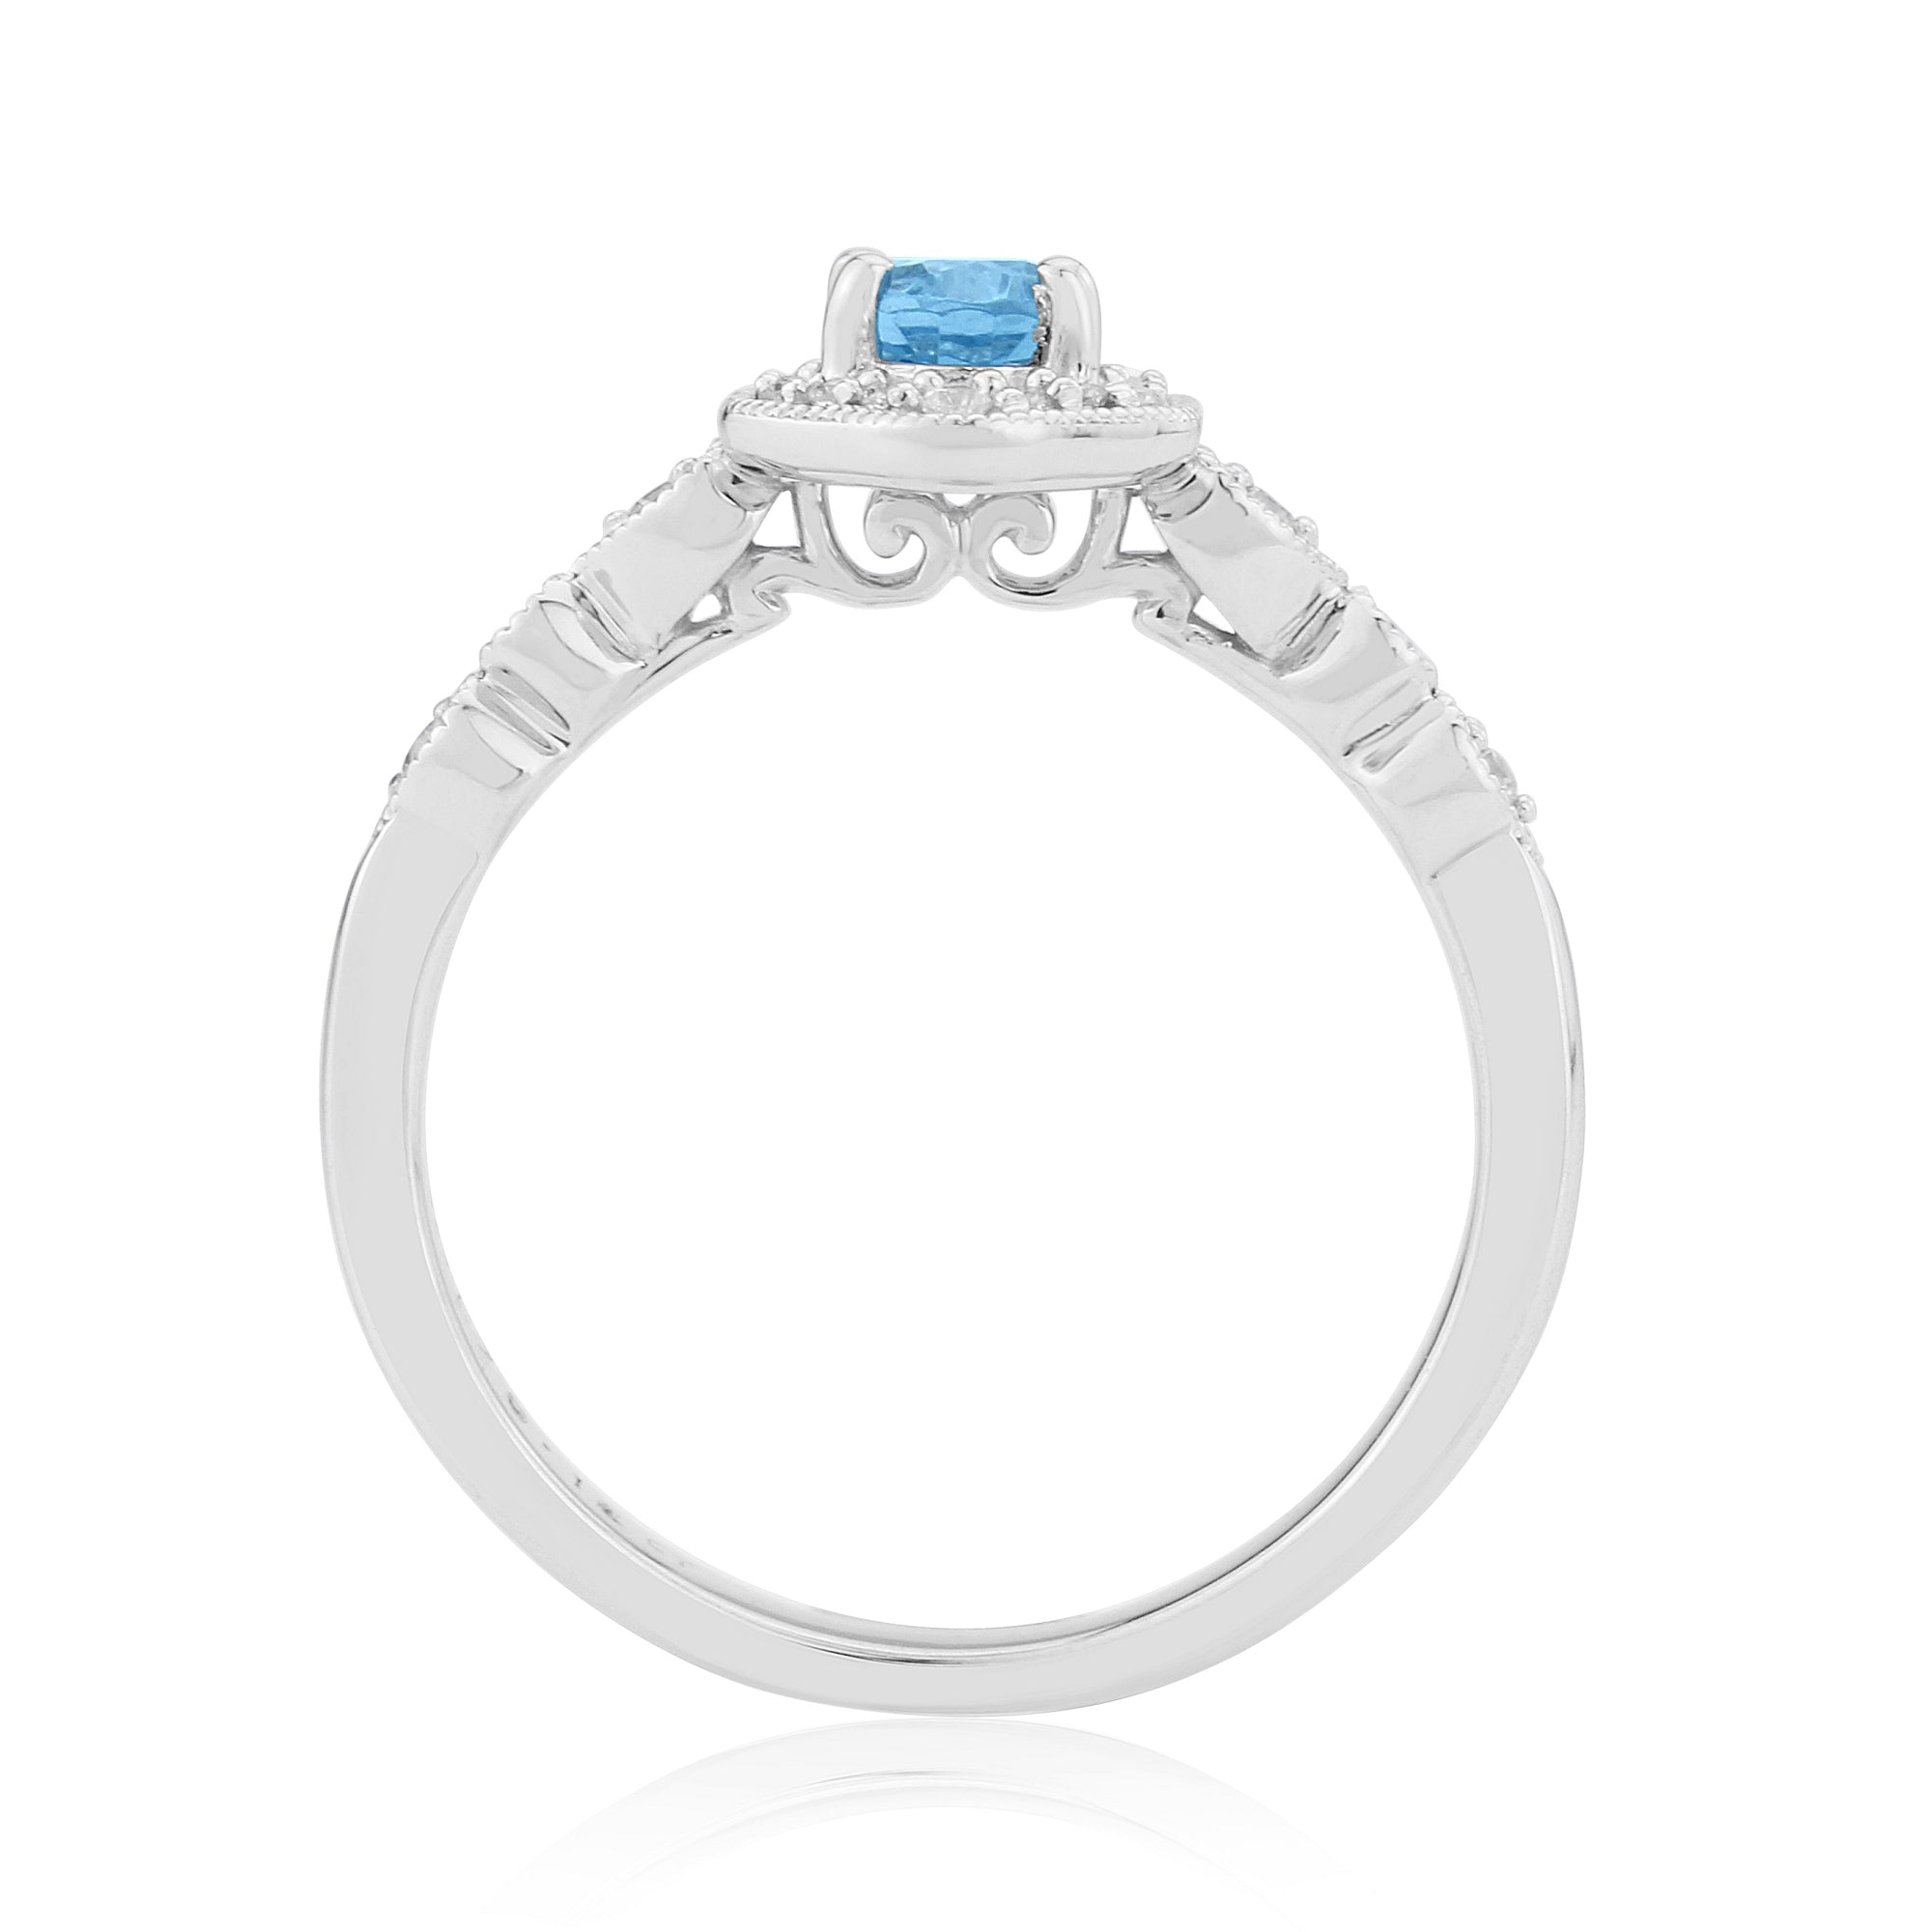 9ct white gold 6x4mm oval blue topaz & diamond cluster ring 0.12ct